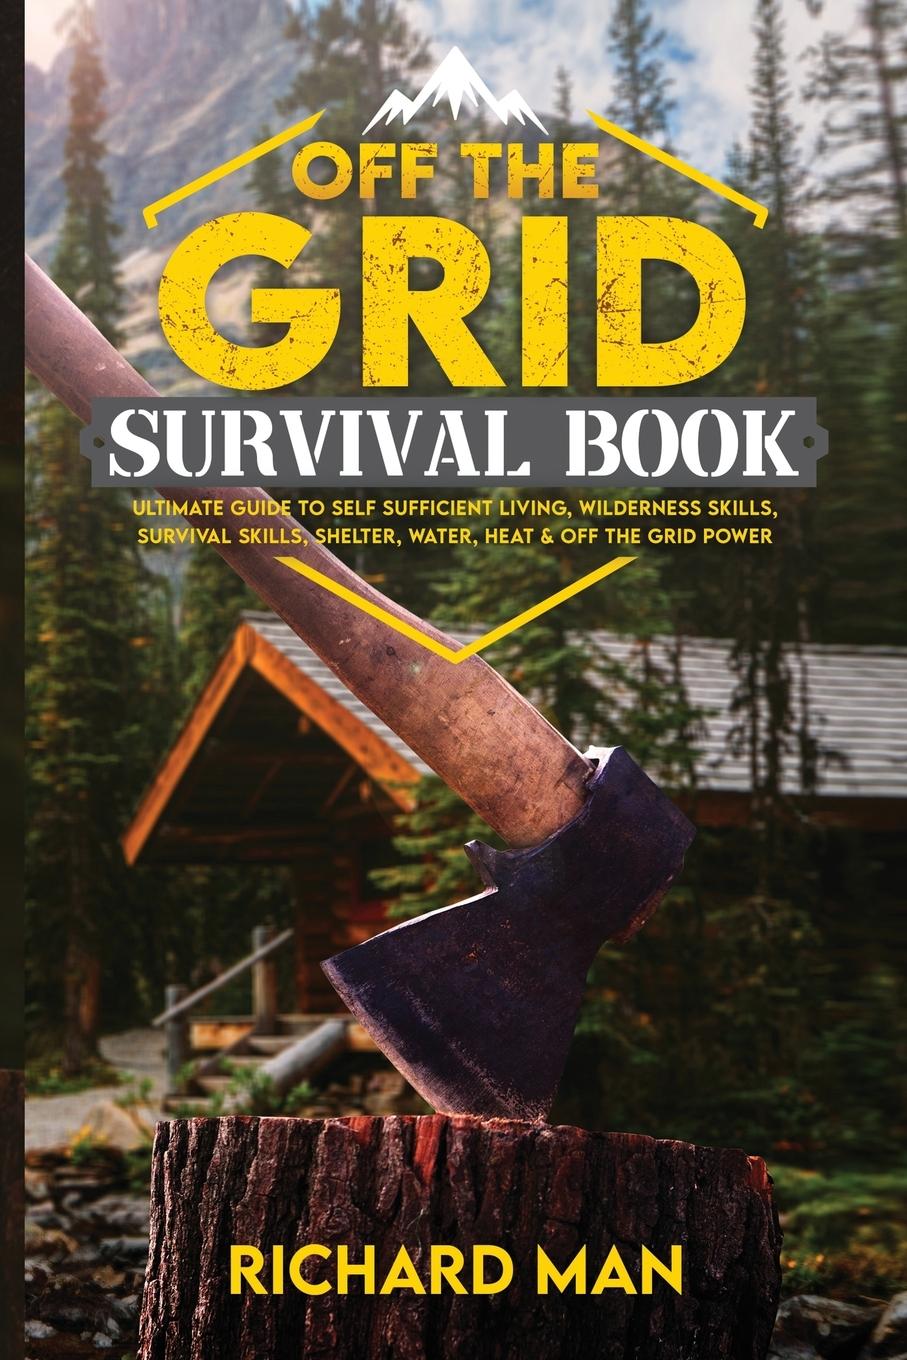 Book Off the Grid Survival Book 